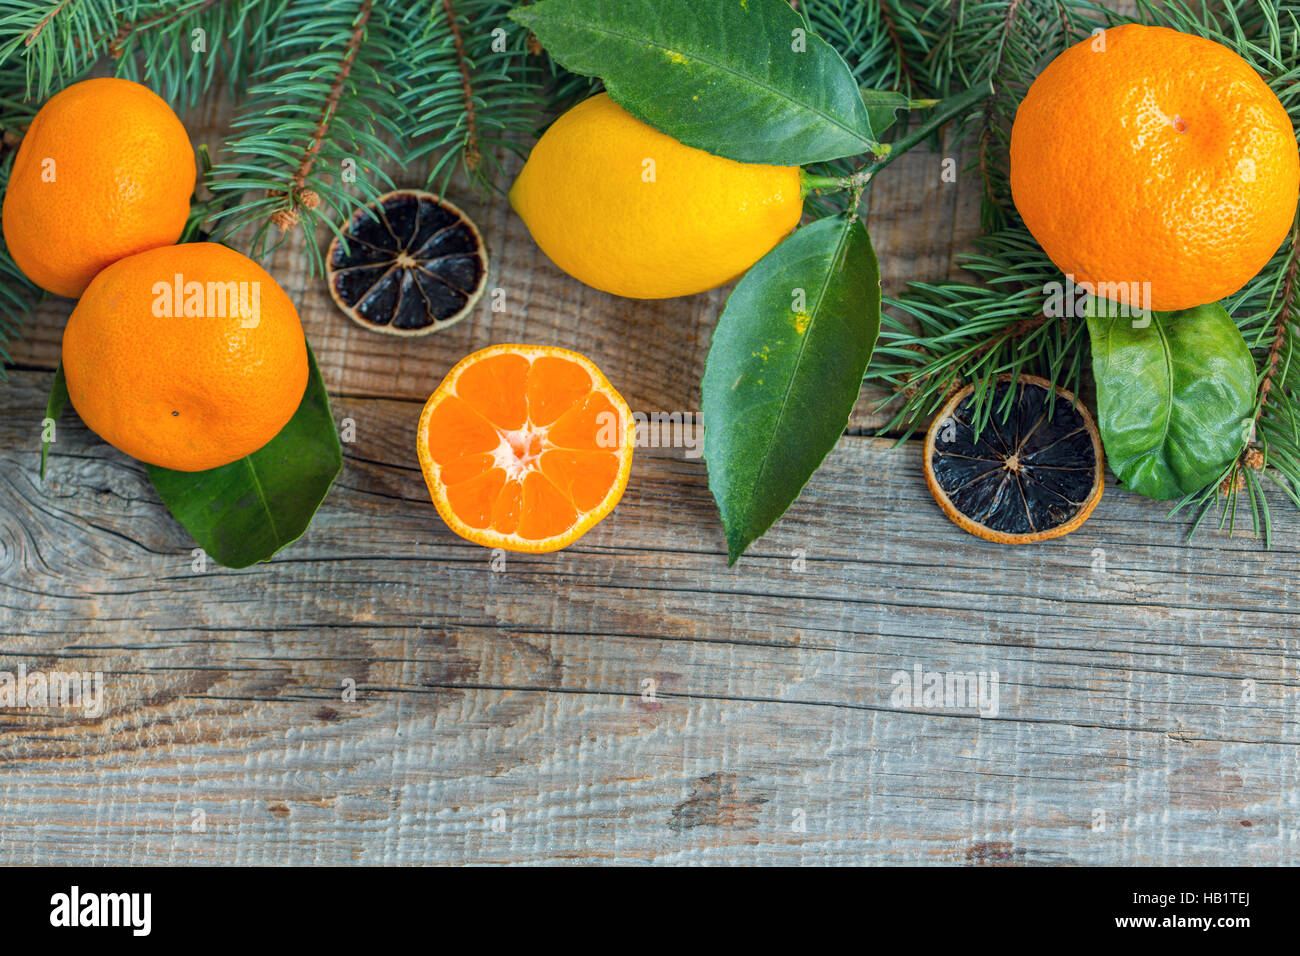 Tangerines, lemons and spruce branches. Stock Photo